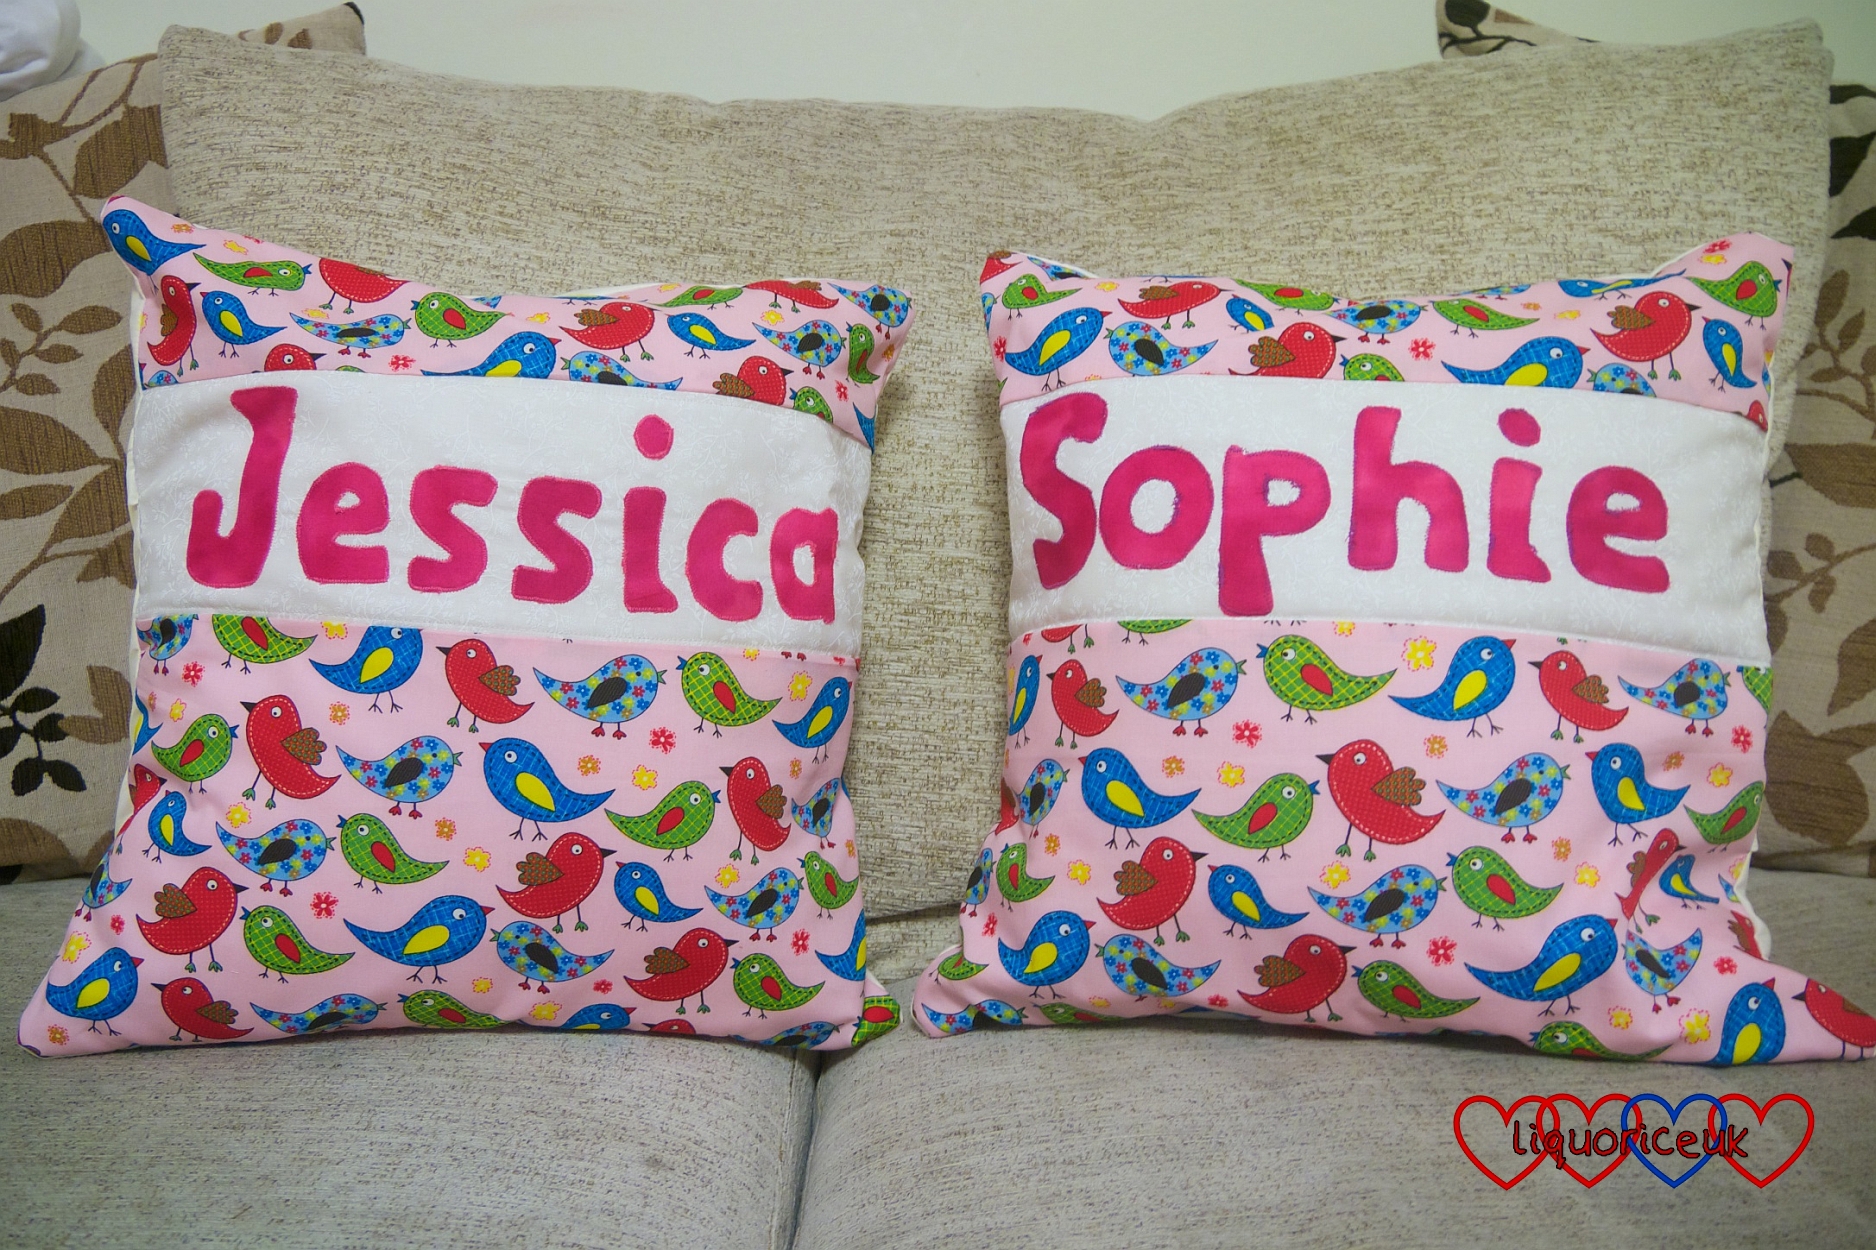 Two cushions with Jessica and Sophie's names on